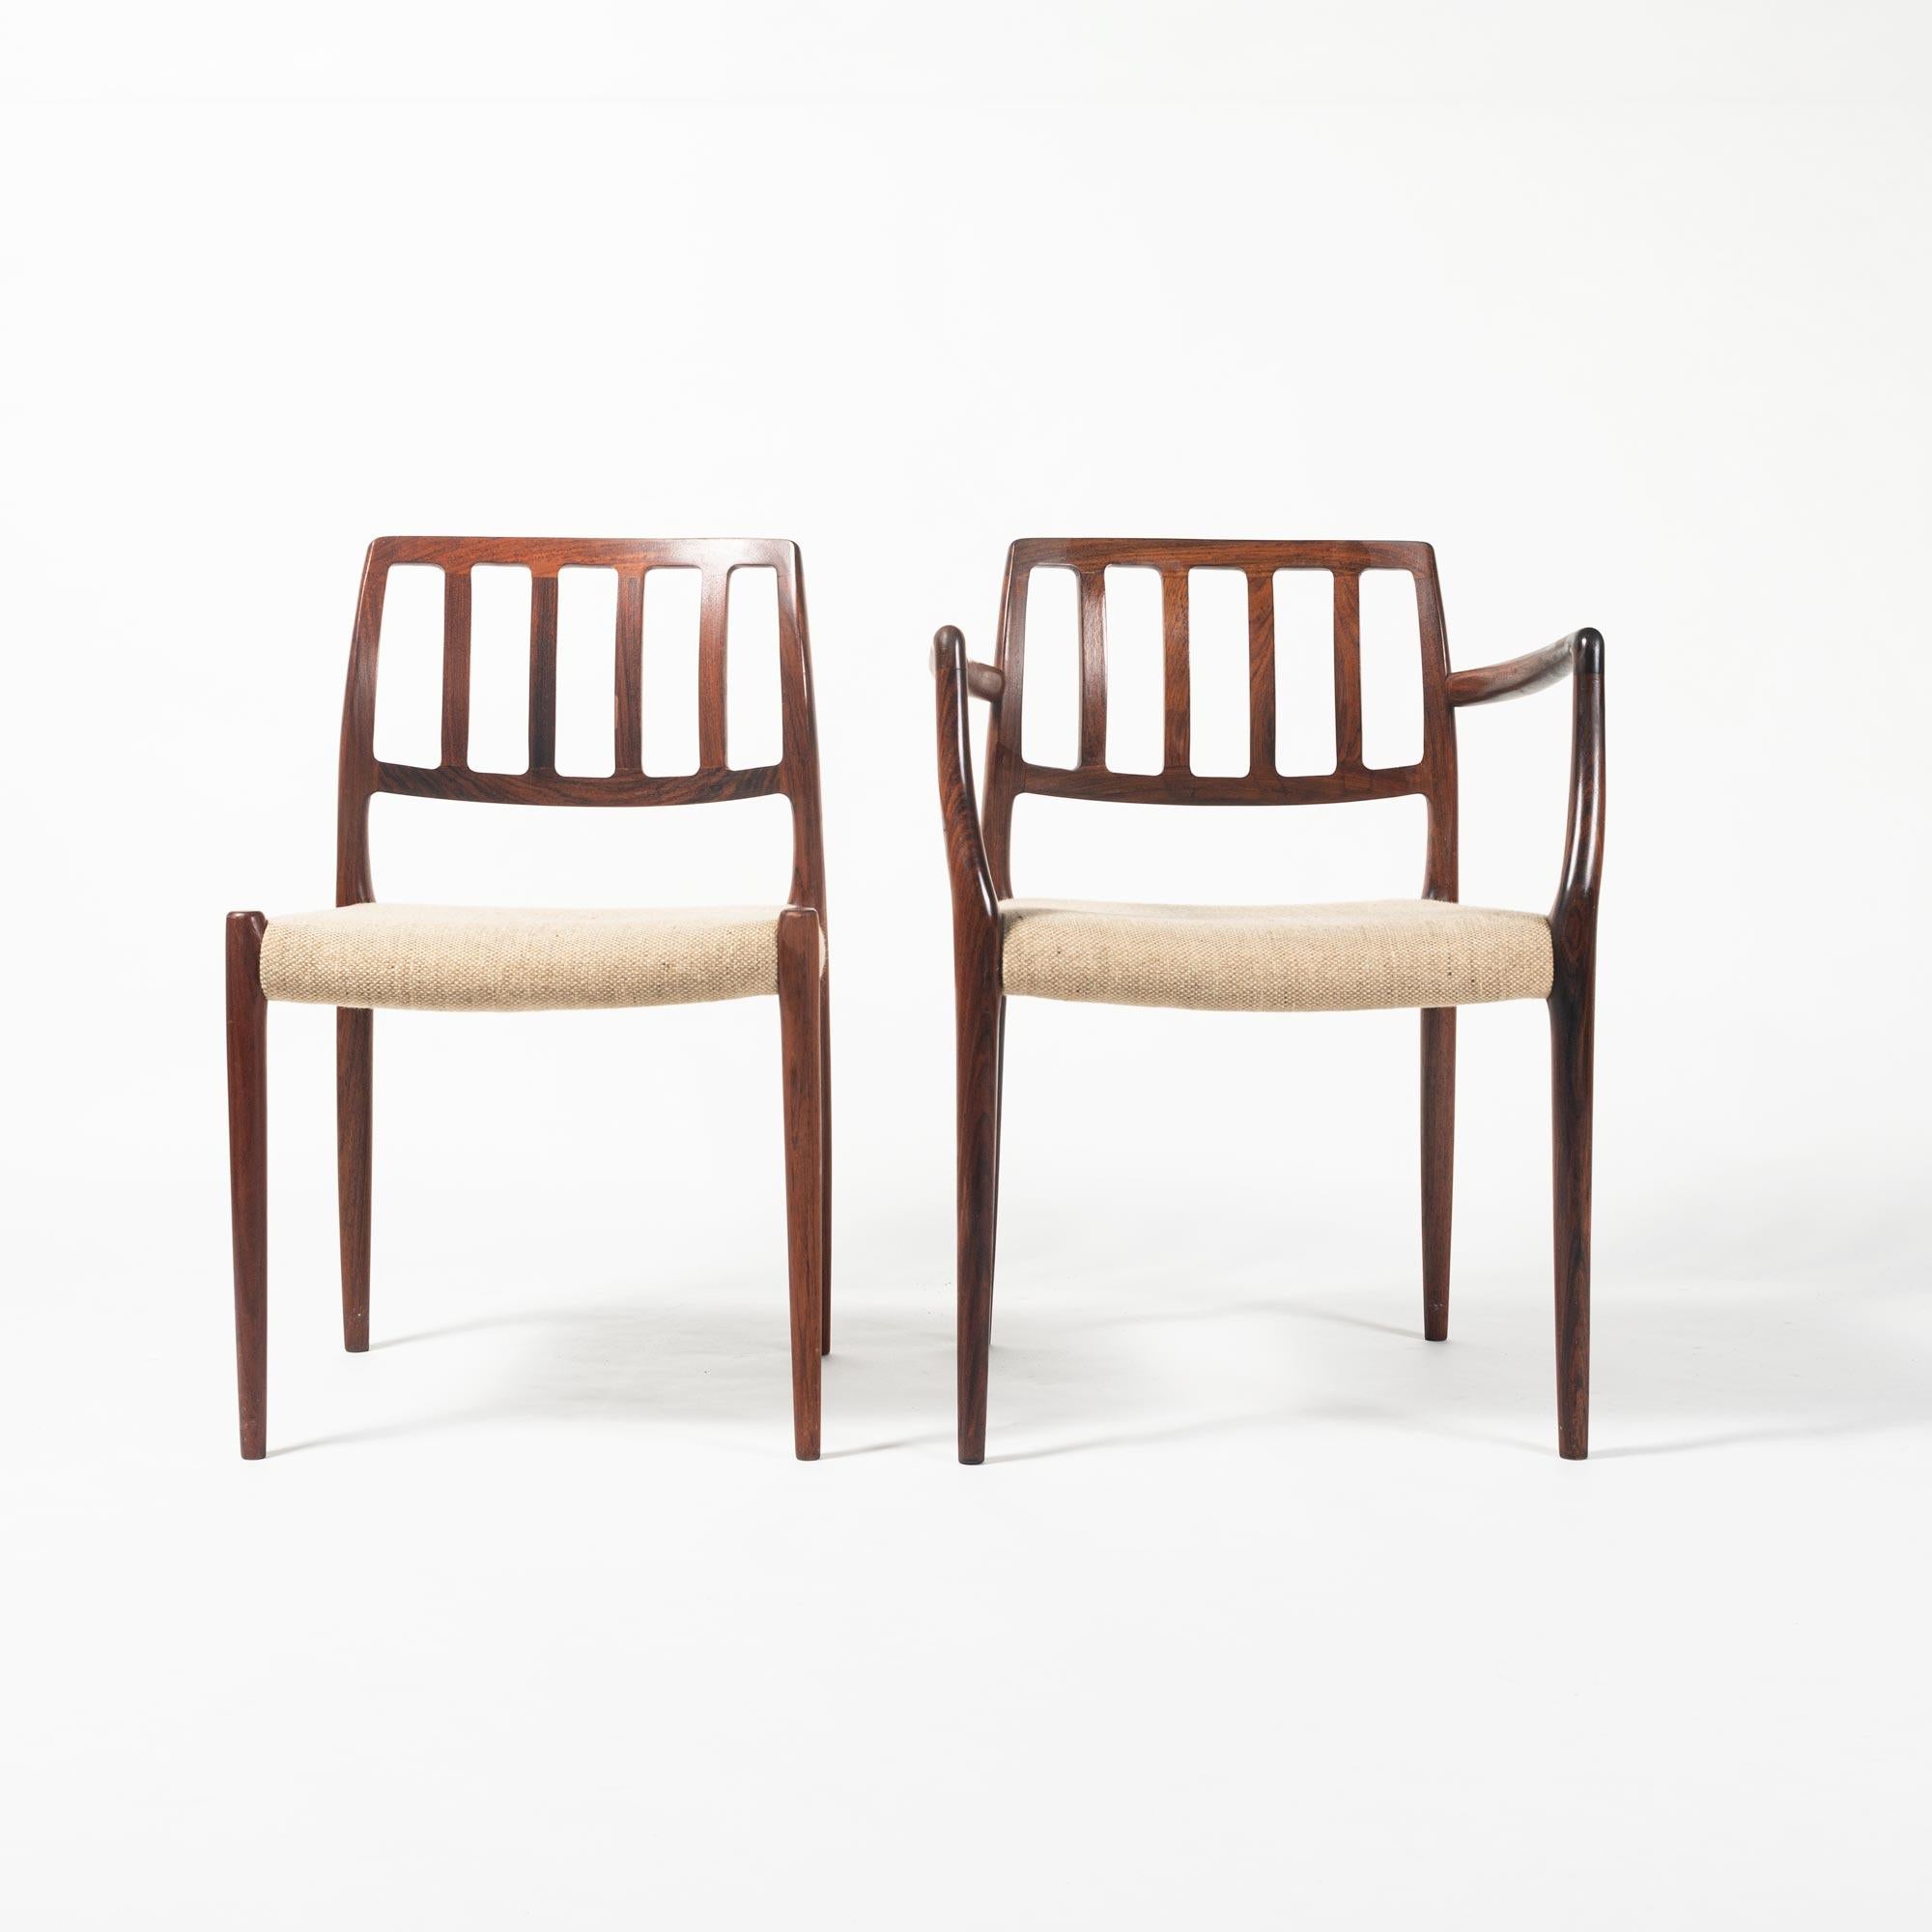 Set of 6 Moller 66 & 83 dining chairs in rosewood and original Kvadrat Oatmeal Wool. Rosewood frame has been refinished and all chairs have original makers mark, circa 1960s.
 